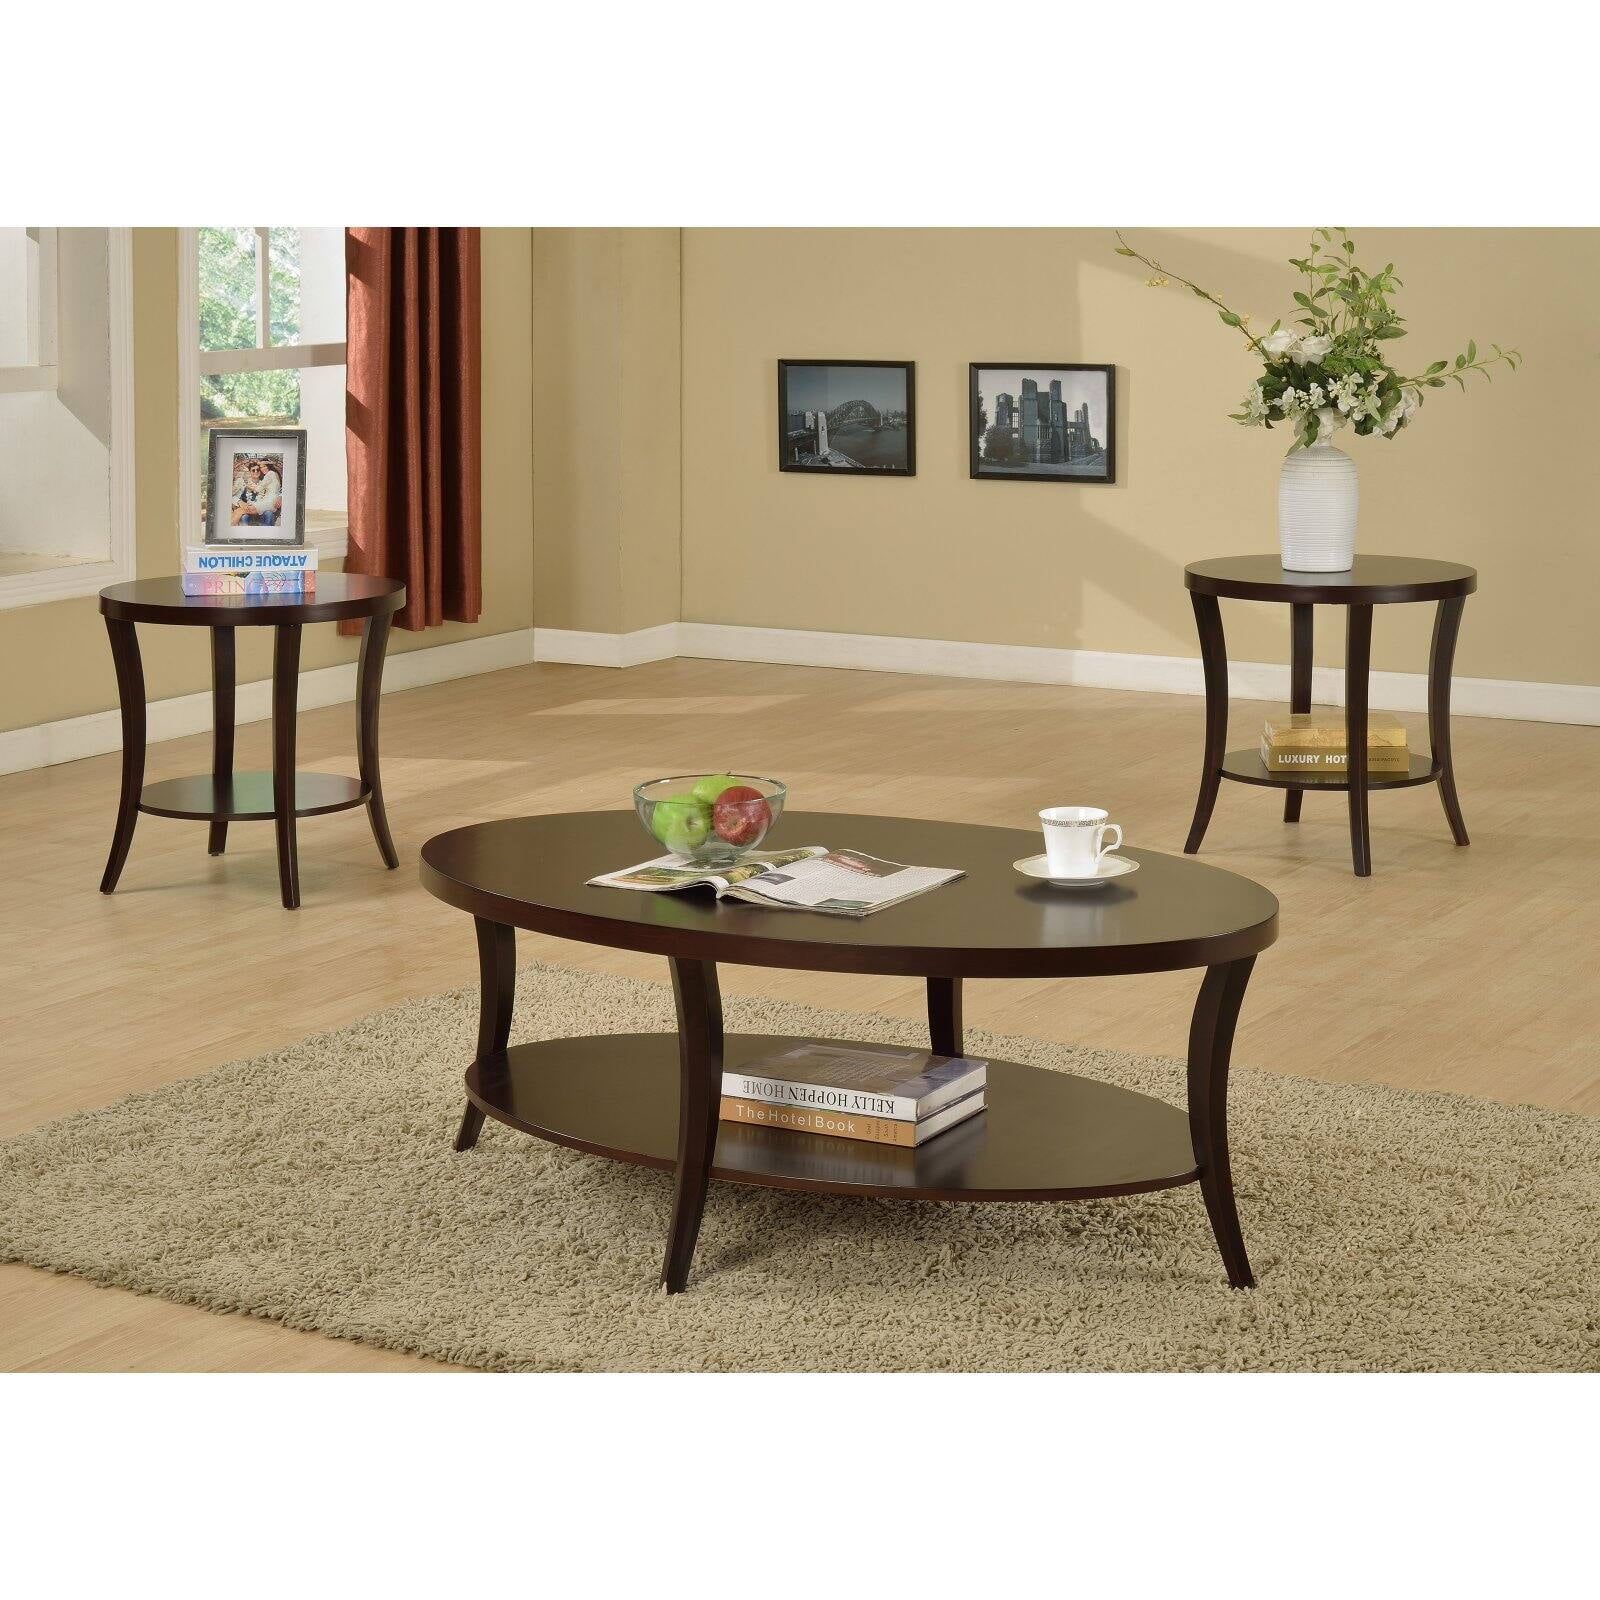 30+ 3 Piece Nesting Coffee Table Set Coffee Table With Ottoman Intended For Coffee Tables Of 3 Nesting Tables (Gallery 19 of 20)